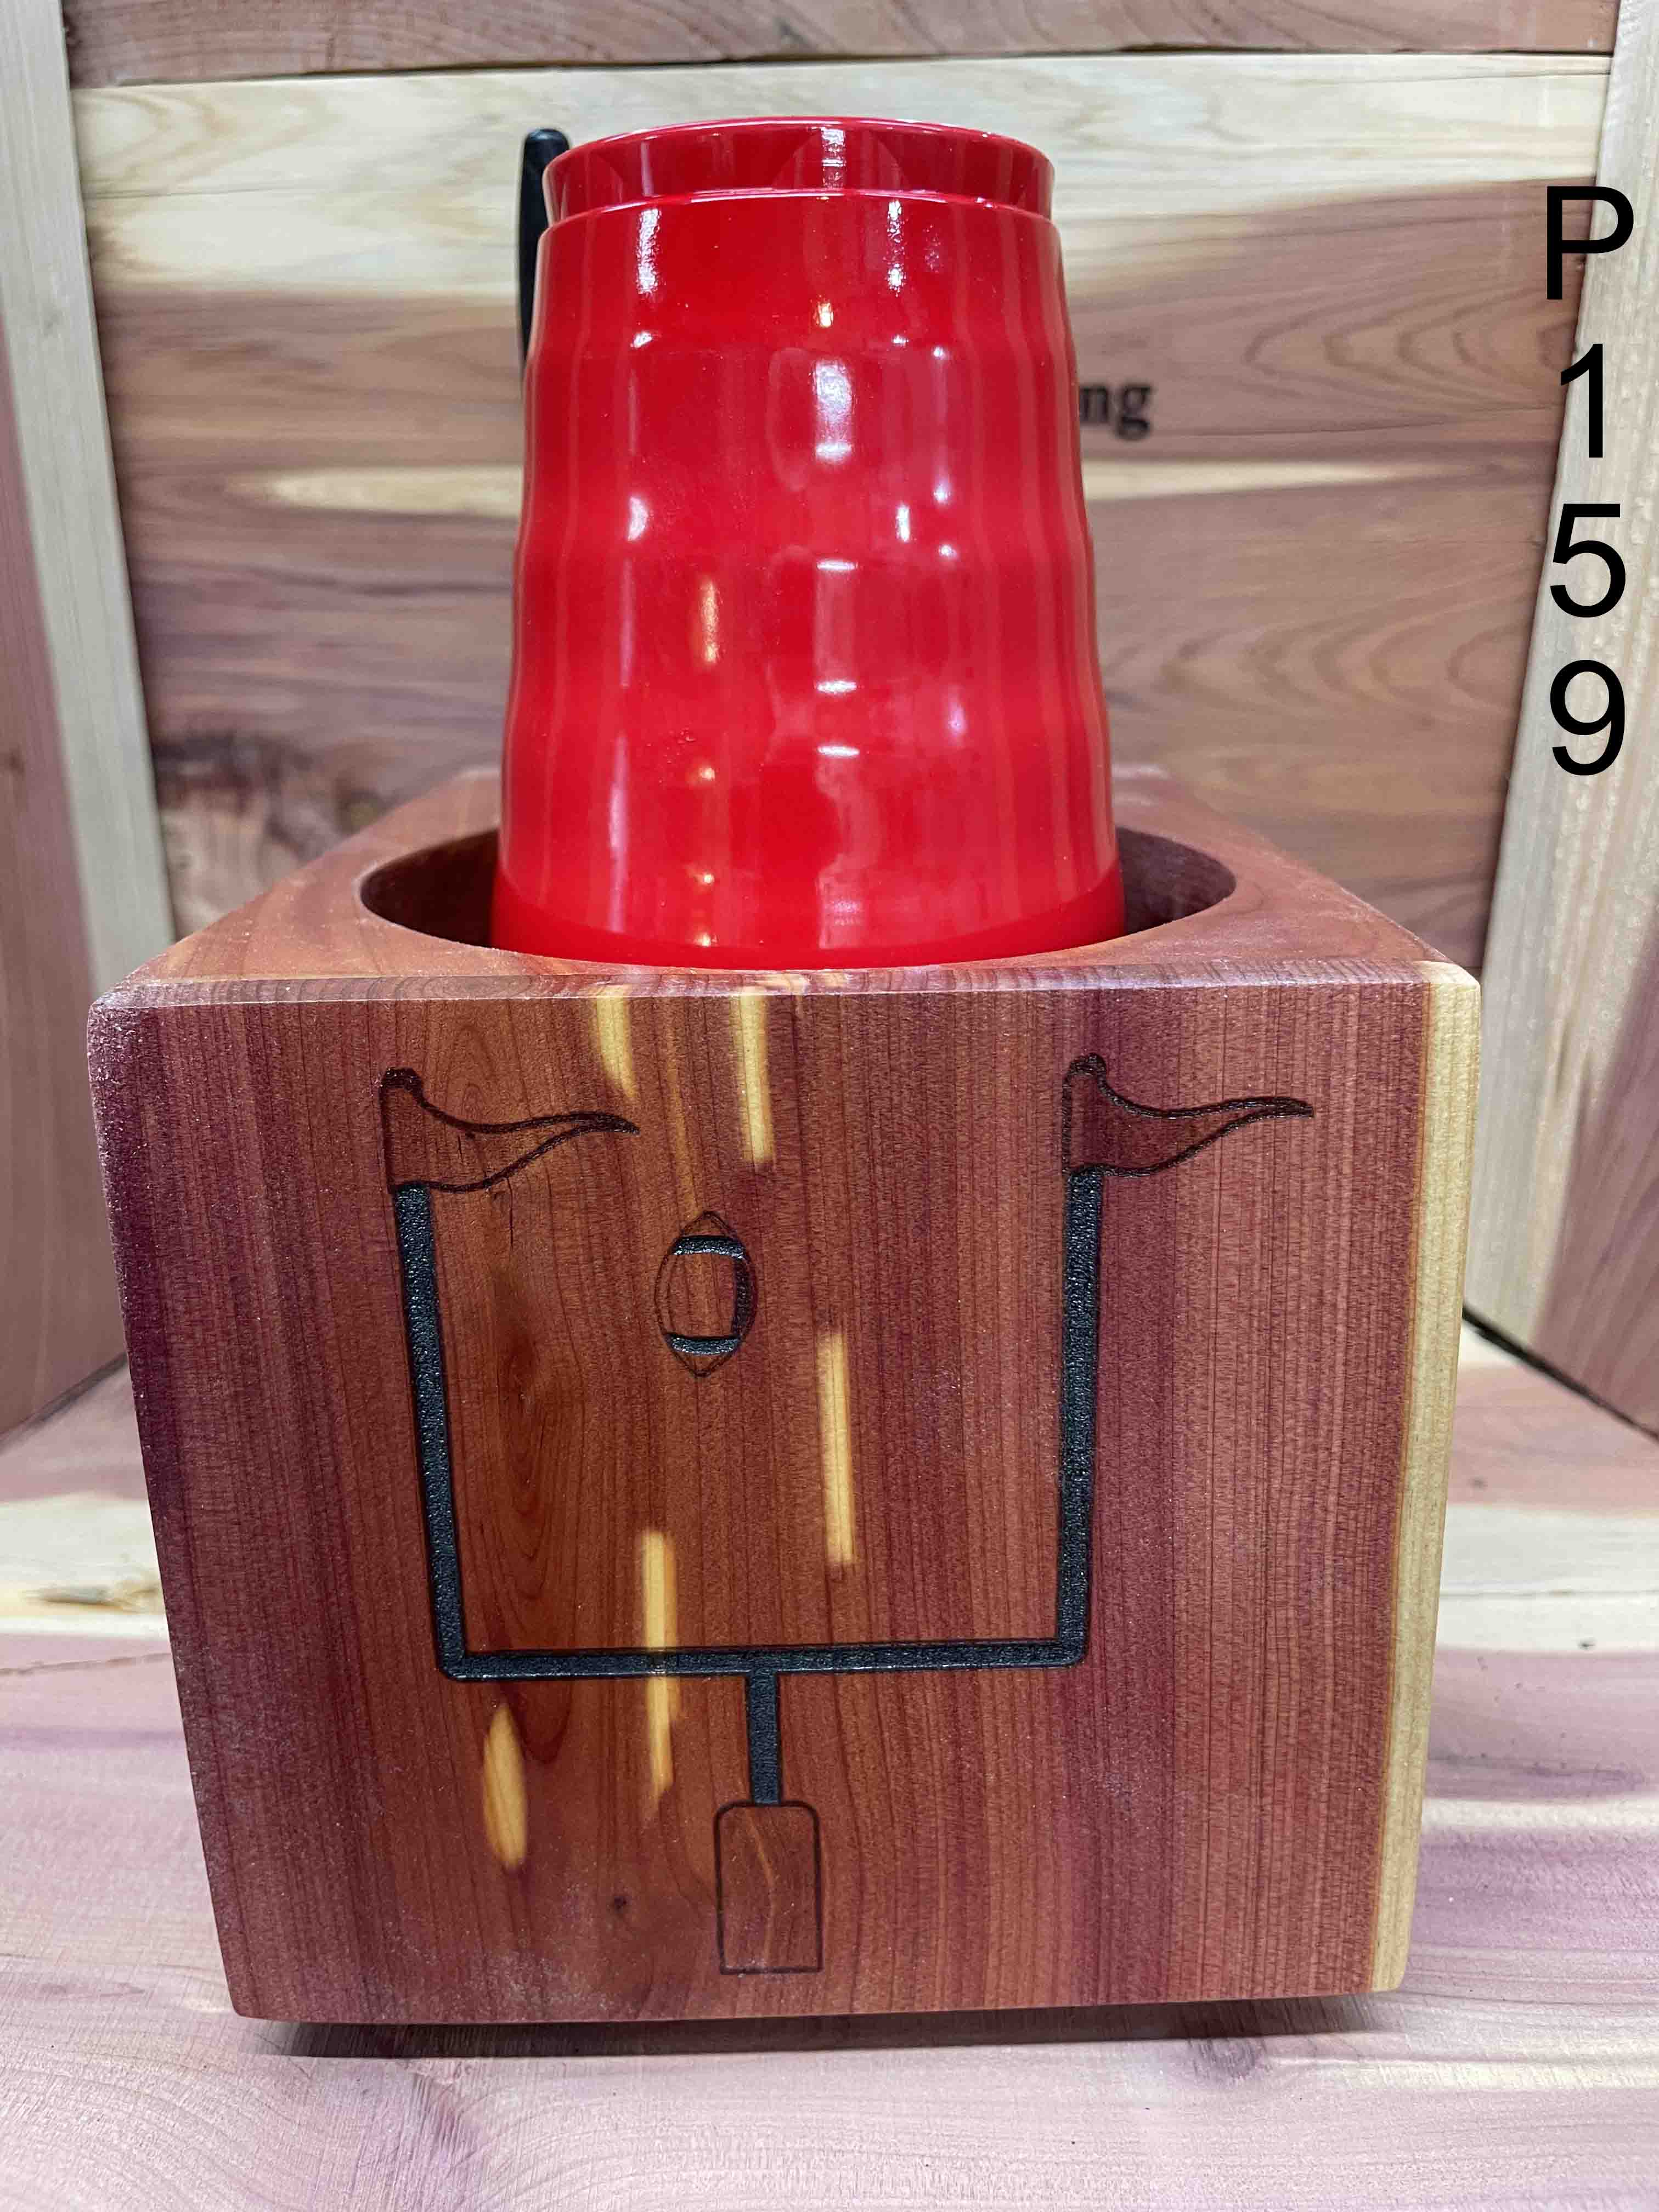 Solo Cup Holder Laser Engraved Red Cedar, "TAKE A CUP & Mark It up" Fish  Pattern"